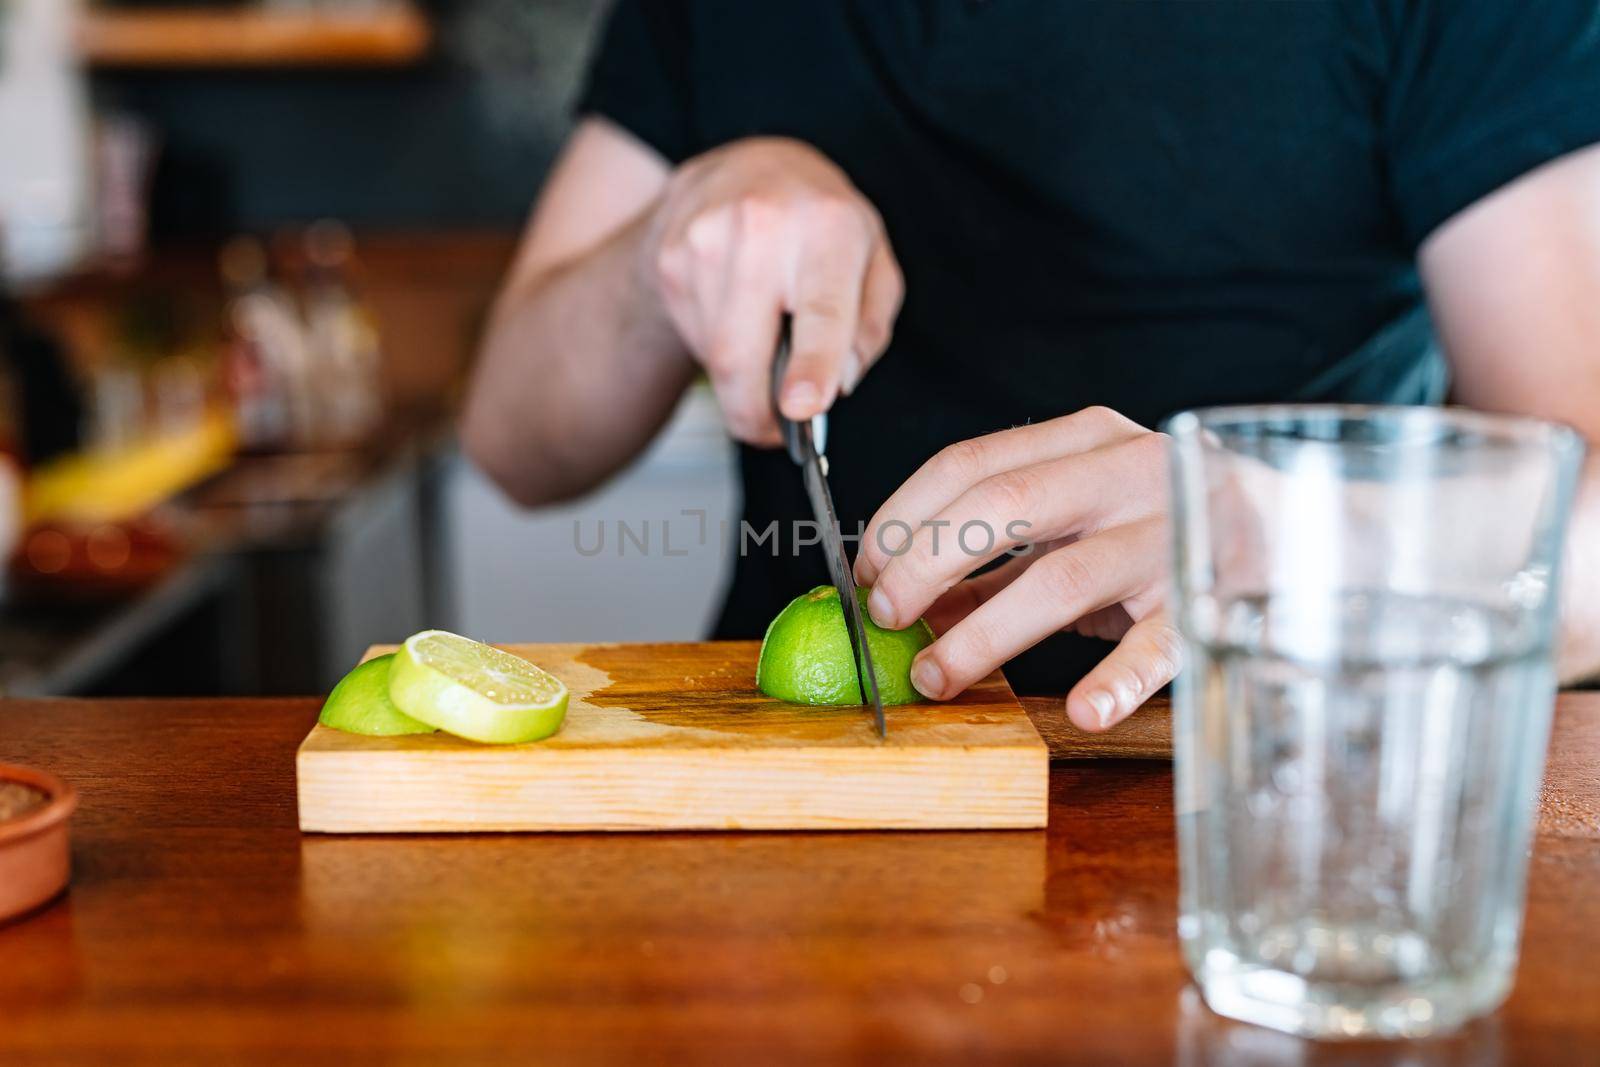 Young and modern waiter, with long dark hair, dressed in black polo shirt, cutting slices of citrus fruit on a wooden board, to prepare a cocktail. Waiter preparing a cocktail. Cocktail glass with ice cubes. Gin and tonic. Bar full of cocktail ingredients. Dark background and dramatic lighting.